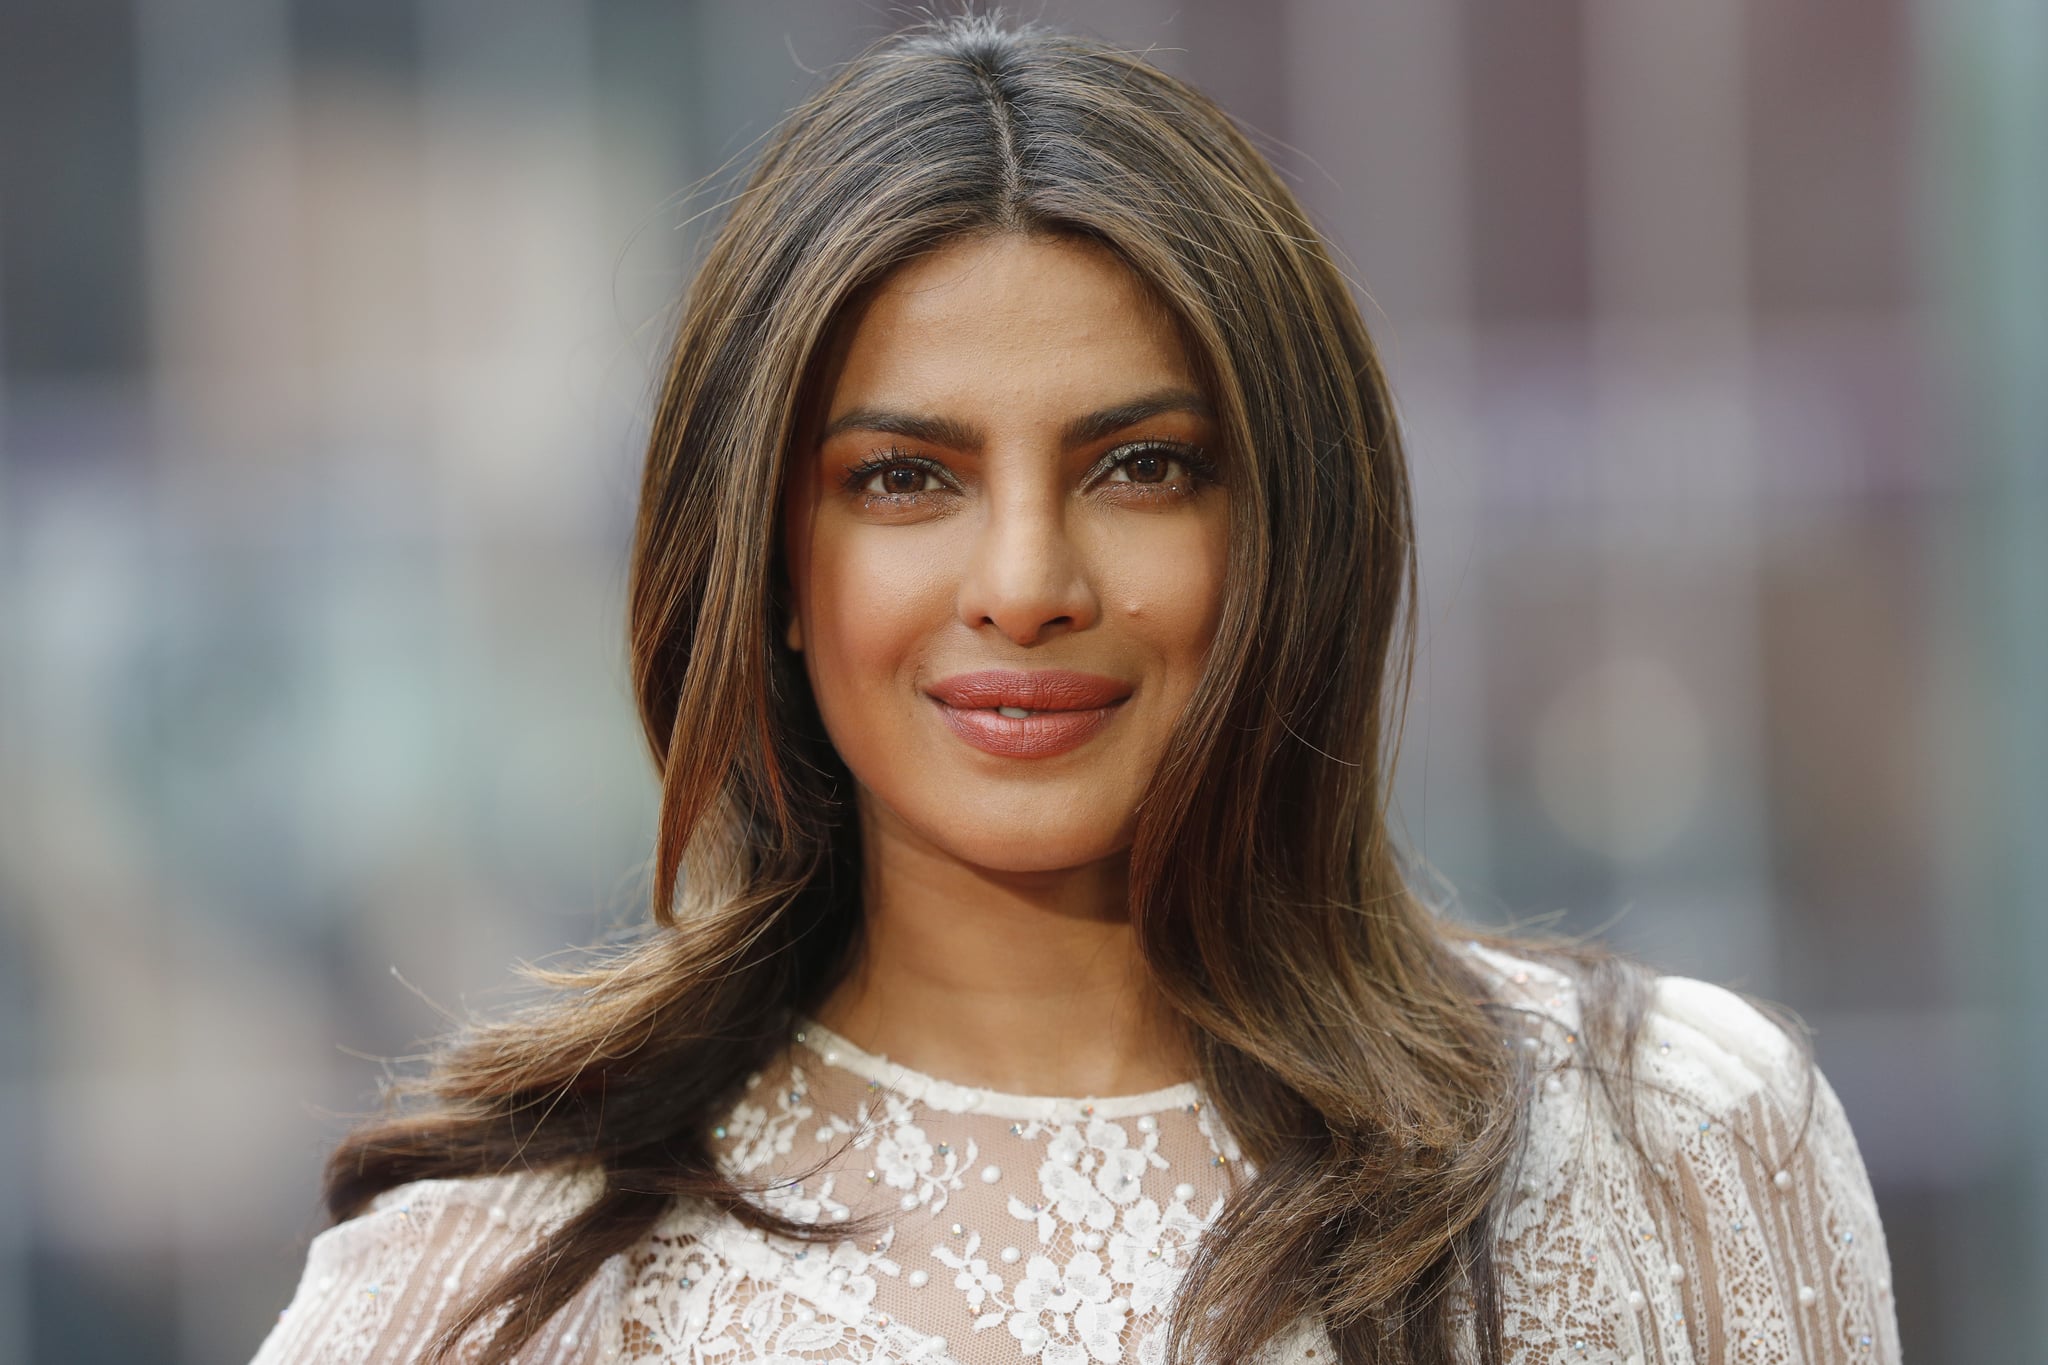 BERLIN, GERMANY - MAY 30:  Priyanka Chopra poses at the 'Baywatch' Photo Call at Sony Centre on May 30, 2017 in Berlin, Germany.  (Photo by Andreas Rentz/Getty Images for Paramount Pictures)